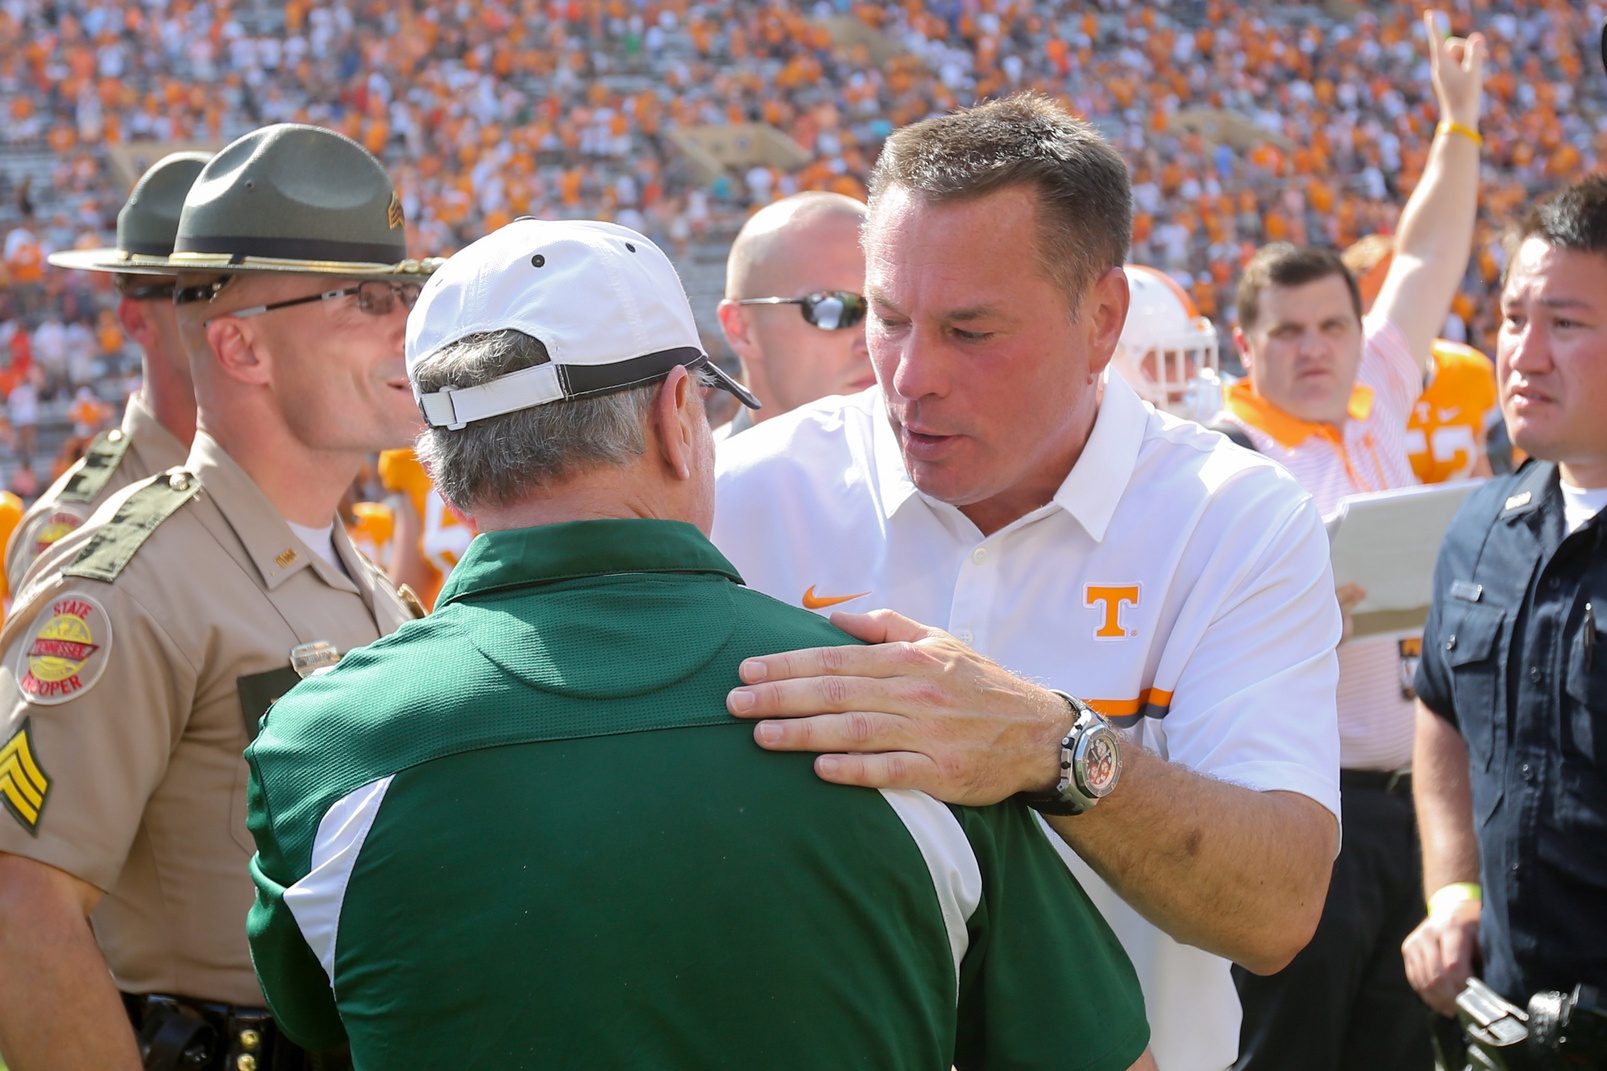 Sep 17, 2016; Knoxville, TN, USA; Tennessee Volunteers head coach Butch Jones and Ohio Bobcats head coach Frank Solich meet after the game at Neyland Stadium. Tennessee won 28-19. Mandatory Credit: Randy Sartin-USA TODAY Sports